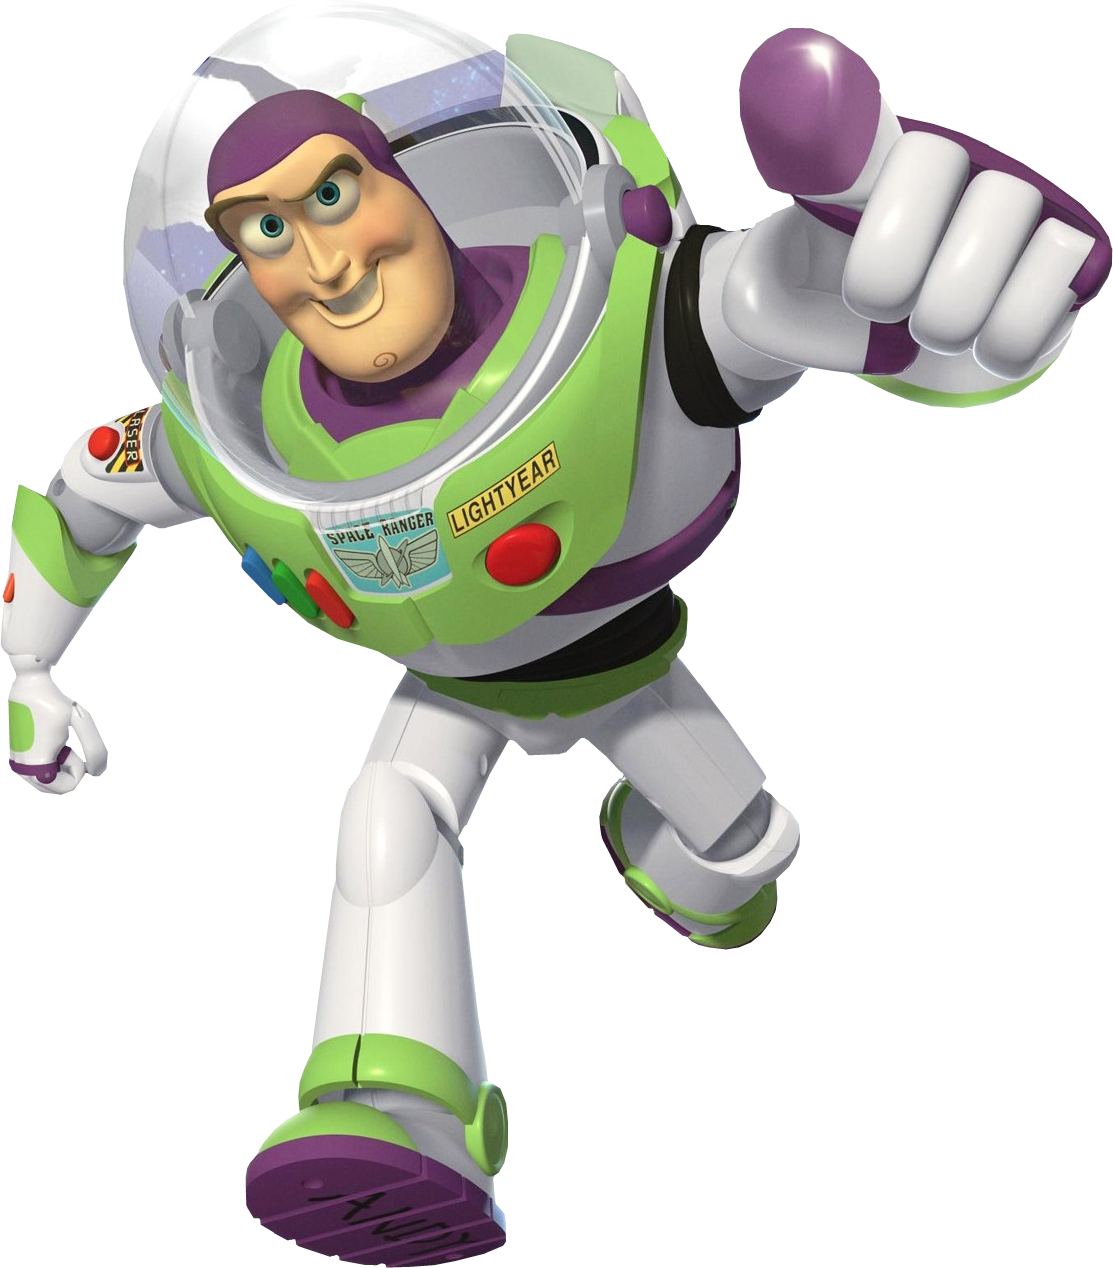 Buzz Lightyear PNG Free Download PNG Clip arts.